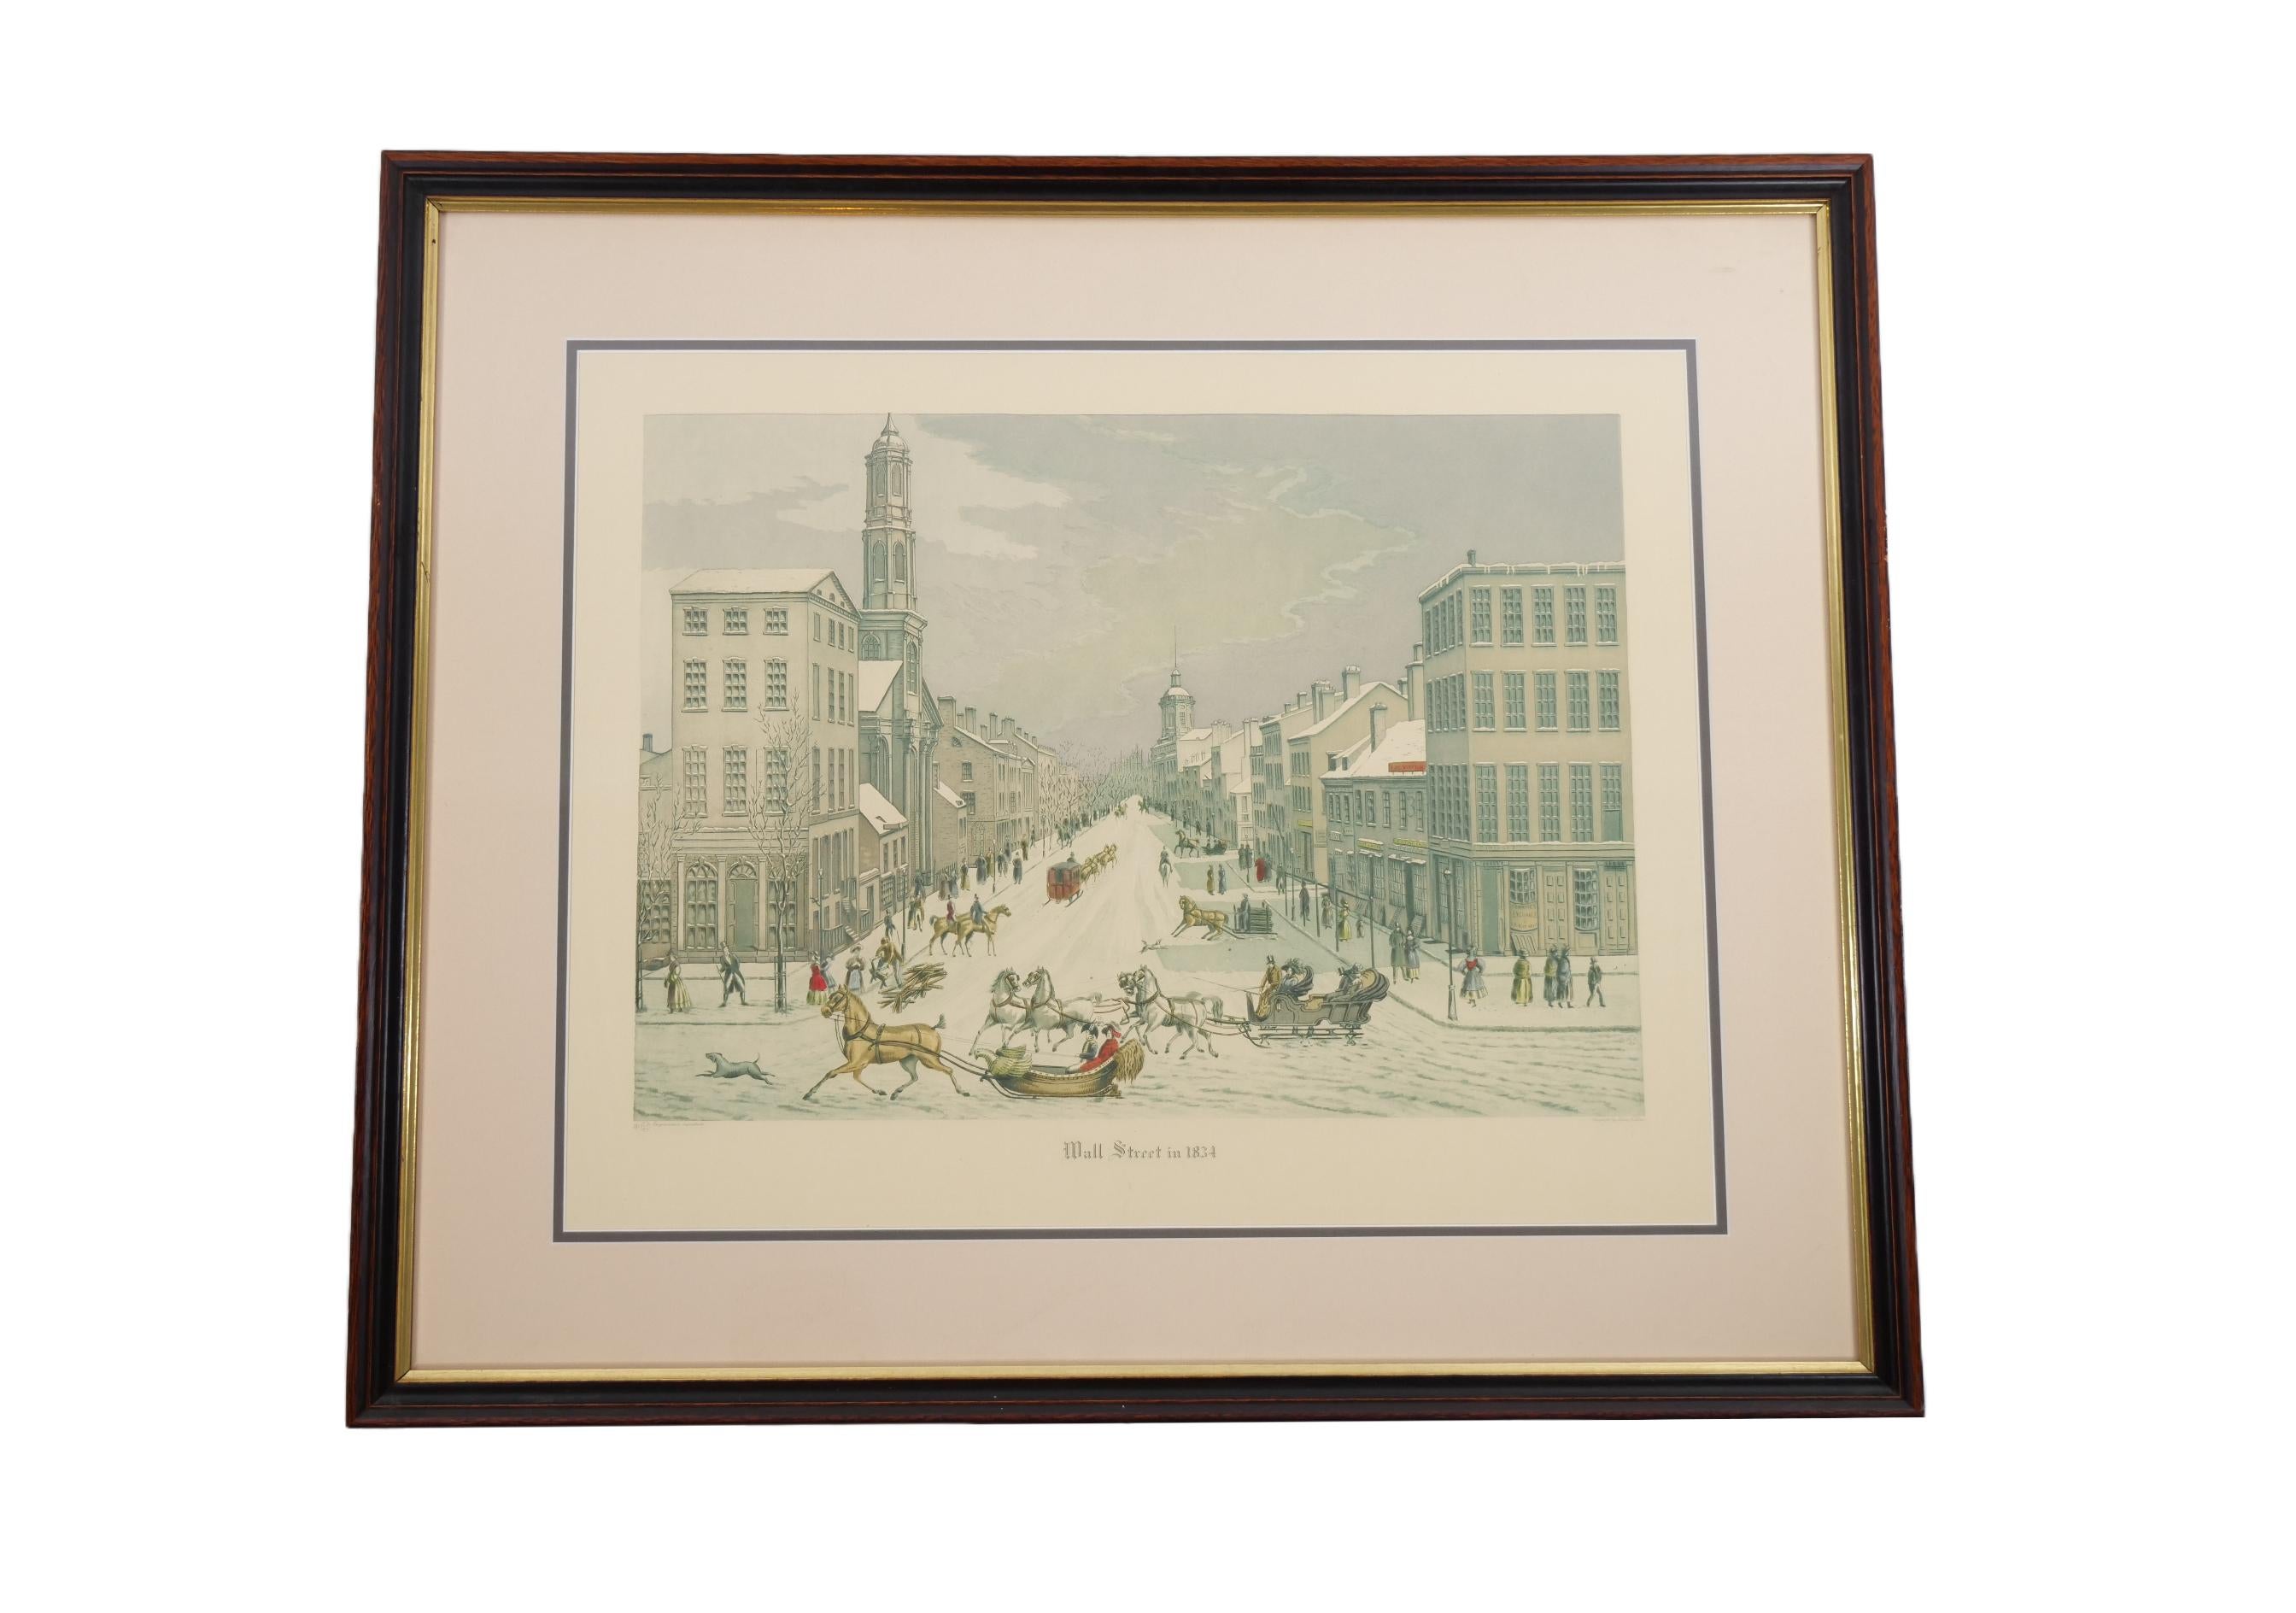 Wall Street 1834 Framed Aquatint Etching After Raoul Varin (1865-1943) For Sale 4